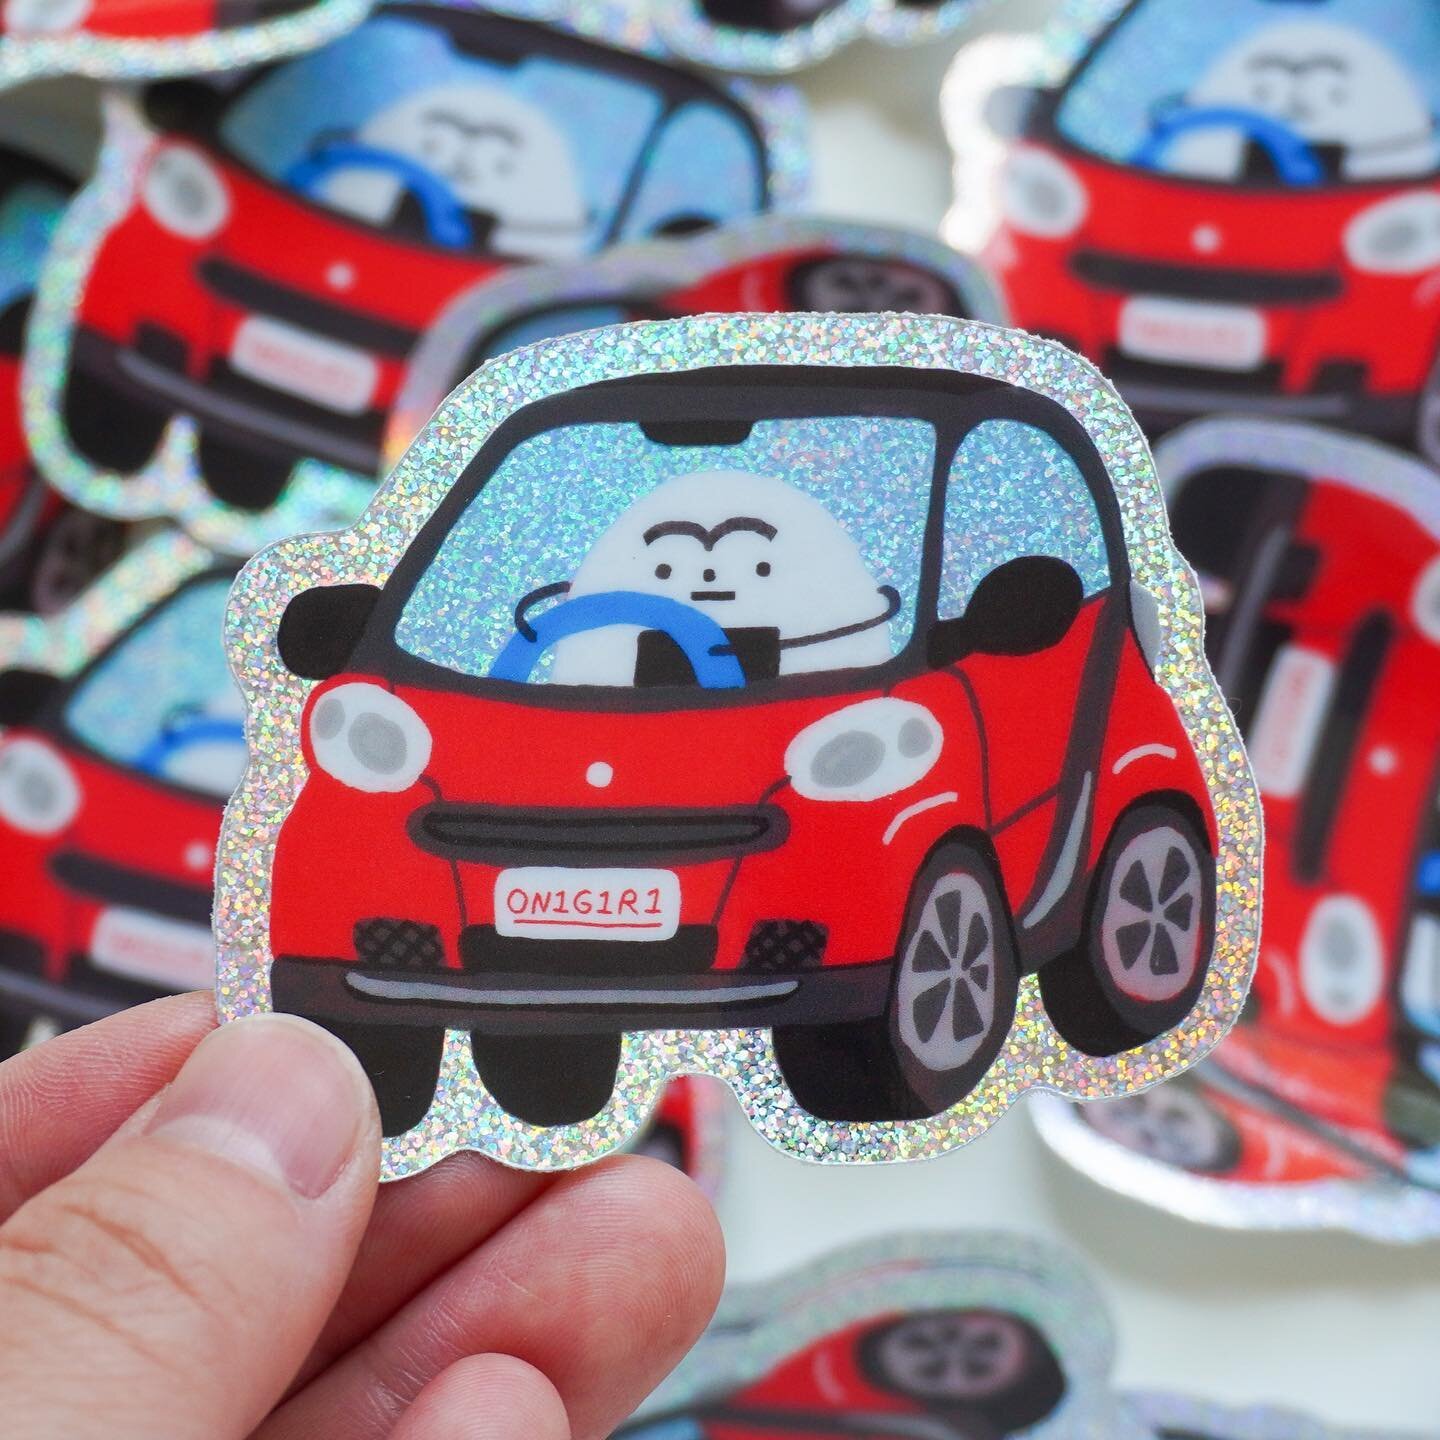 Beep beep!! 🍙 🚗 💨 

this new sticker along with a lot of other fun stuff (including a t-shirt!!!) will be available this Friday at 10AM PST! 

once I get my shirts in the mail I&rsquo;ll be sure to post a catalog of everything :-) also&hellip; all